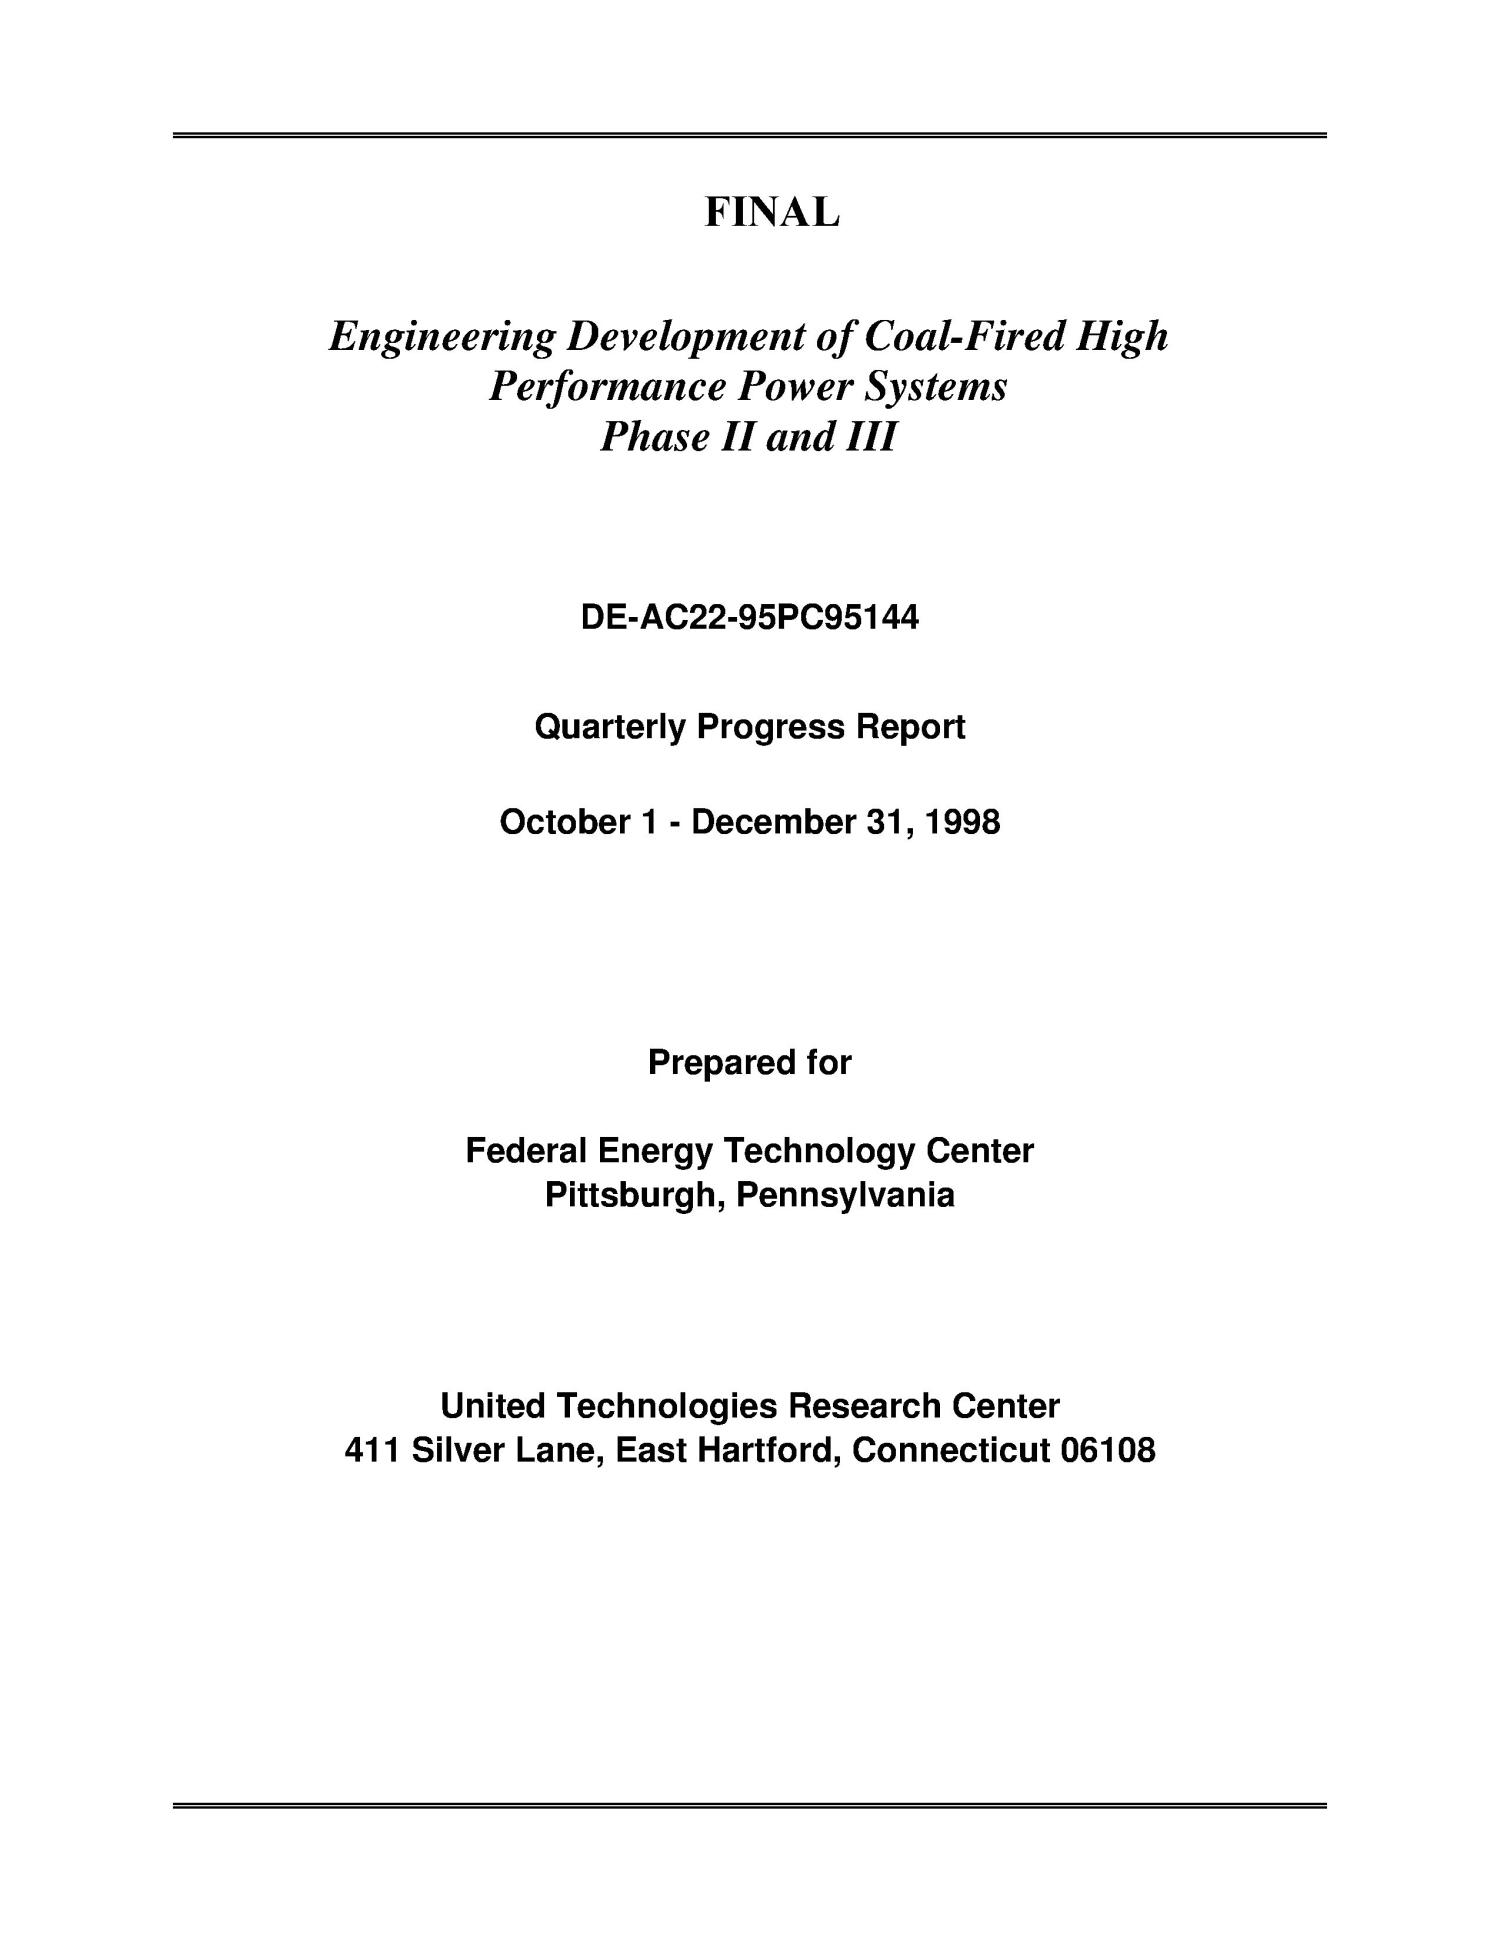 Engineering development of coal-fired high performance power systems, Phase II and III
                                                
                                                    [Sequence #]: 3 of 84
                                                